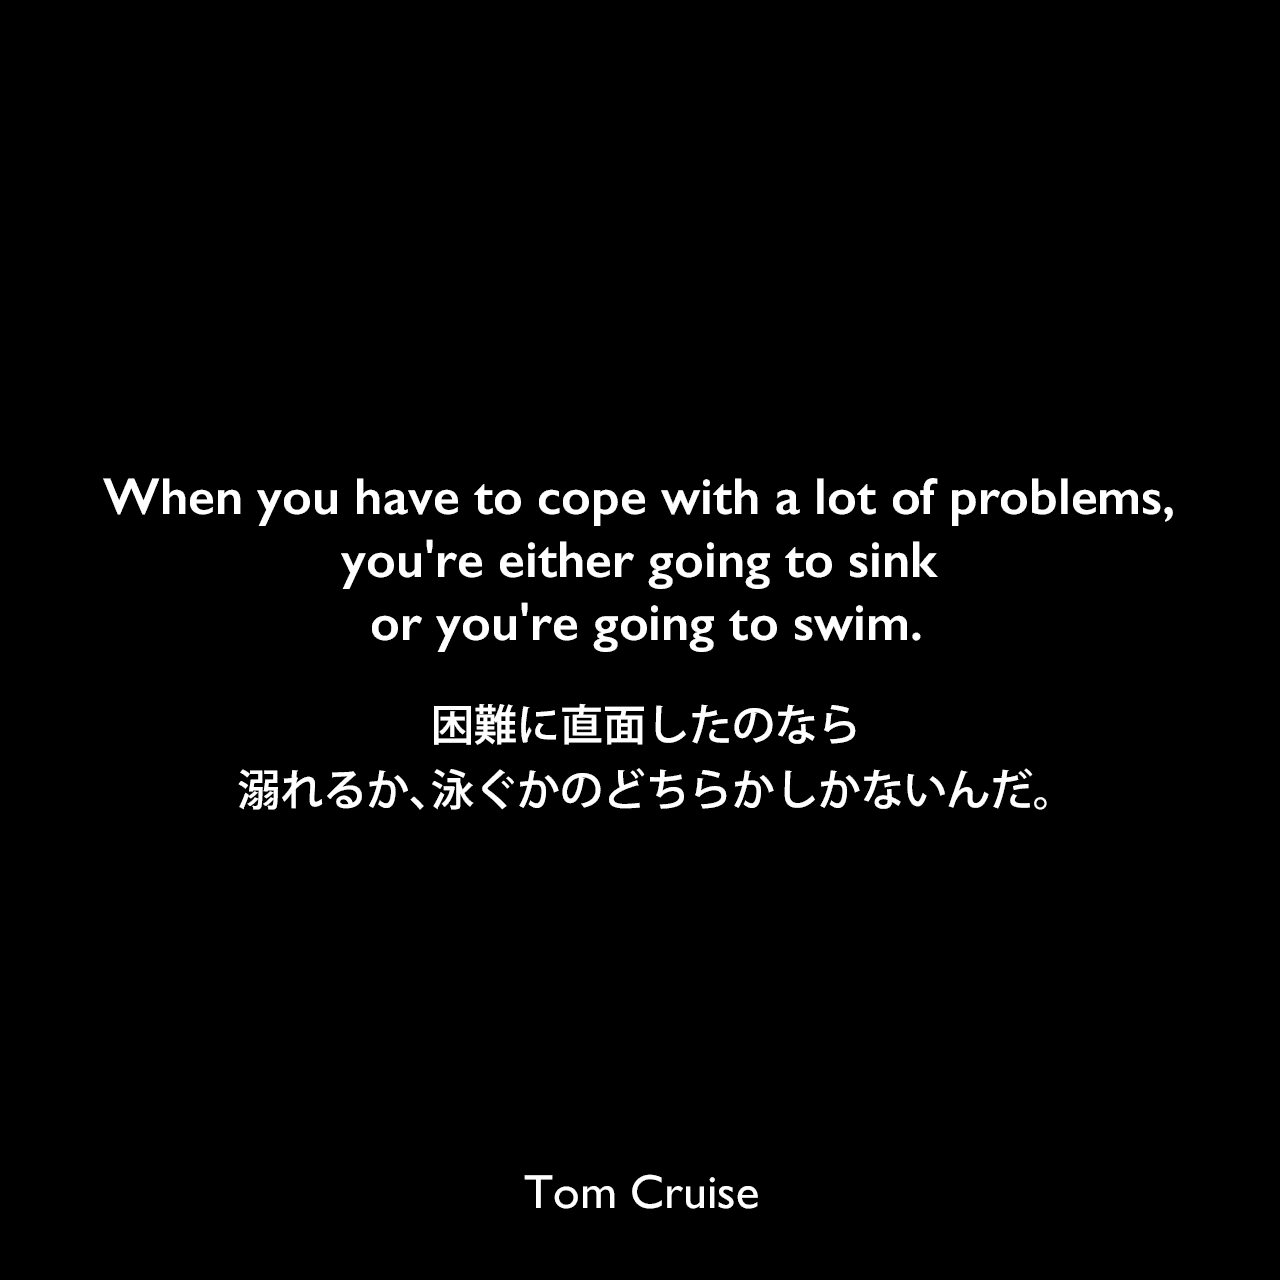 When you have to cope with a lot of problems, you're either going to sink or you're going to swim.困難に直面したのなら、溺れるか、泳ぐかのどちらかしかないんだ。